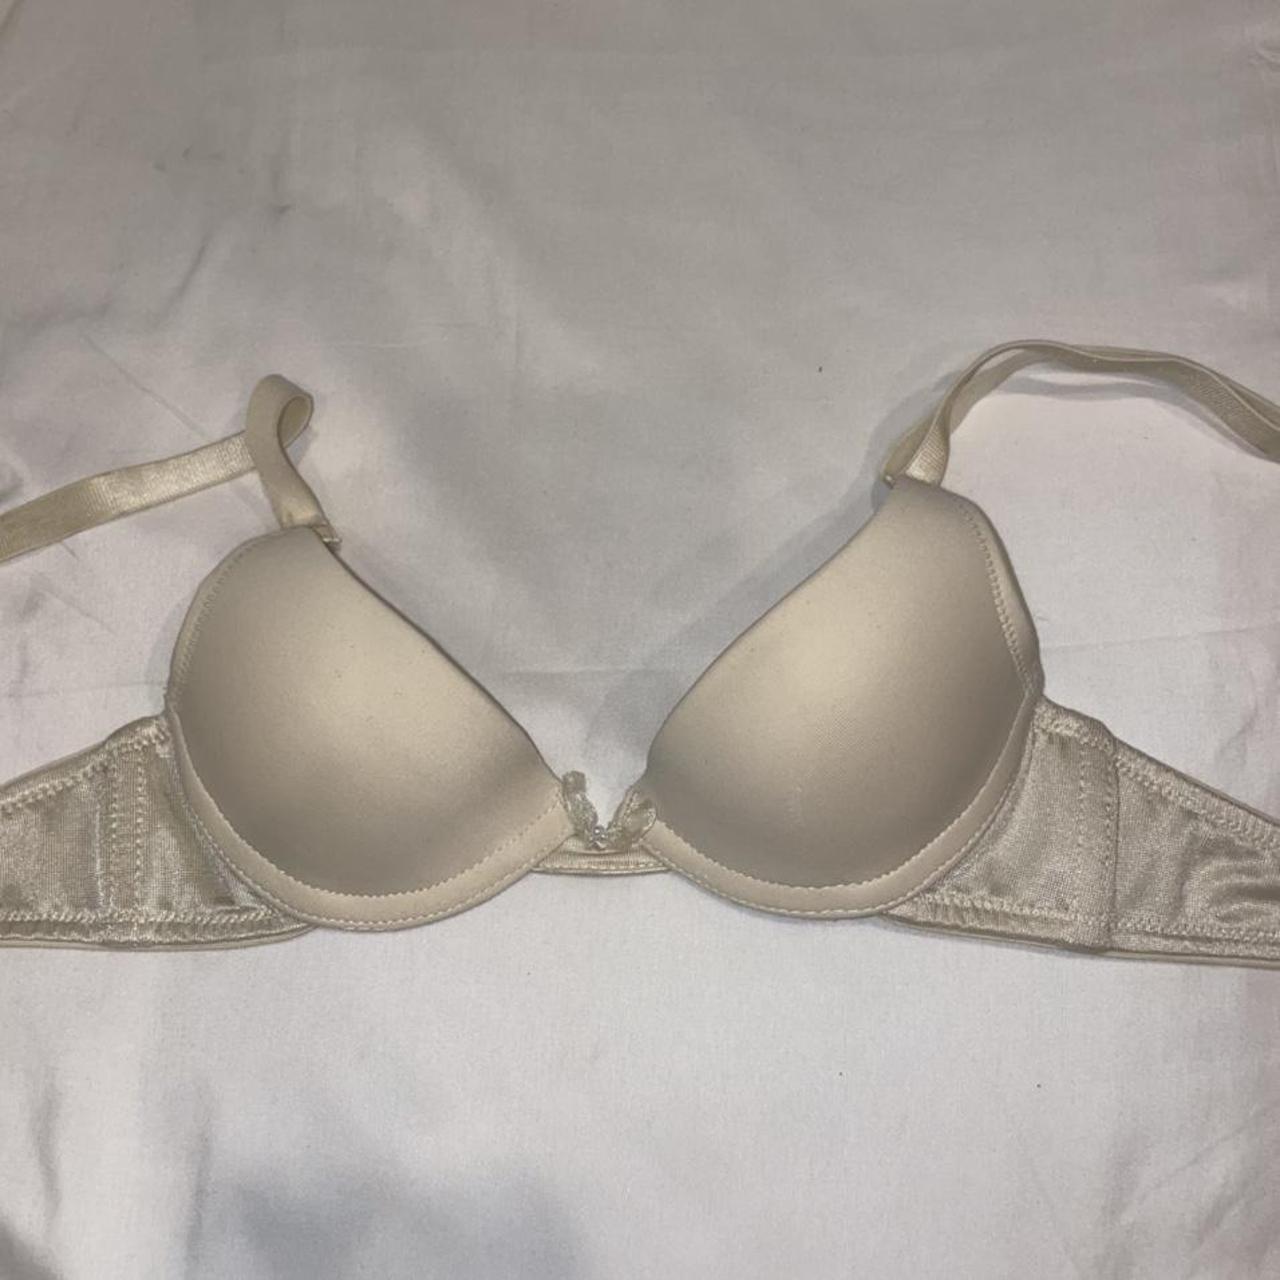 Product Image 1 - Push up Bra for petite